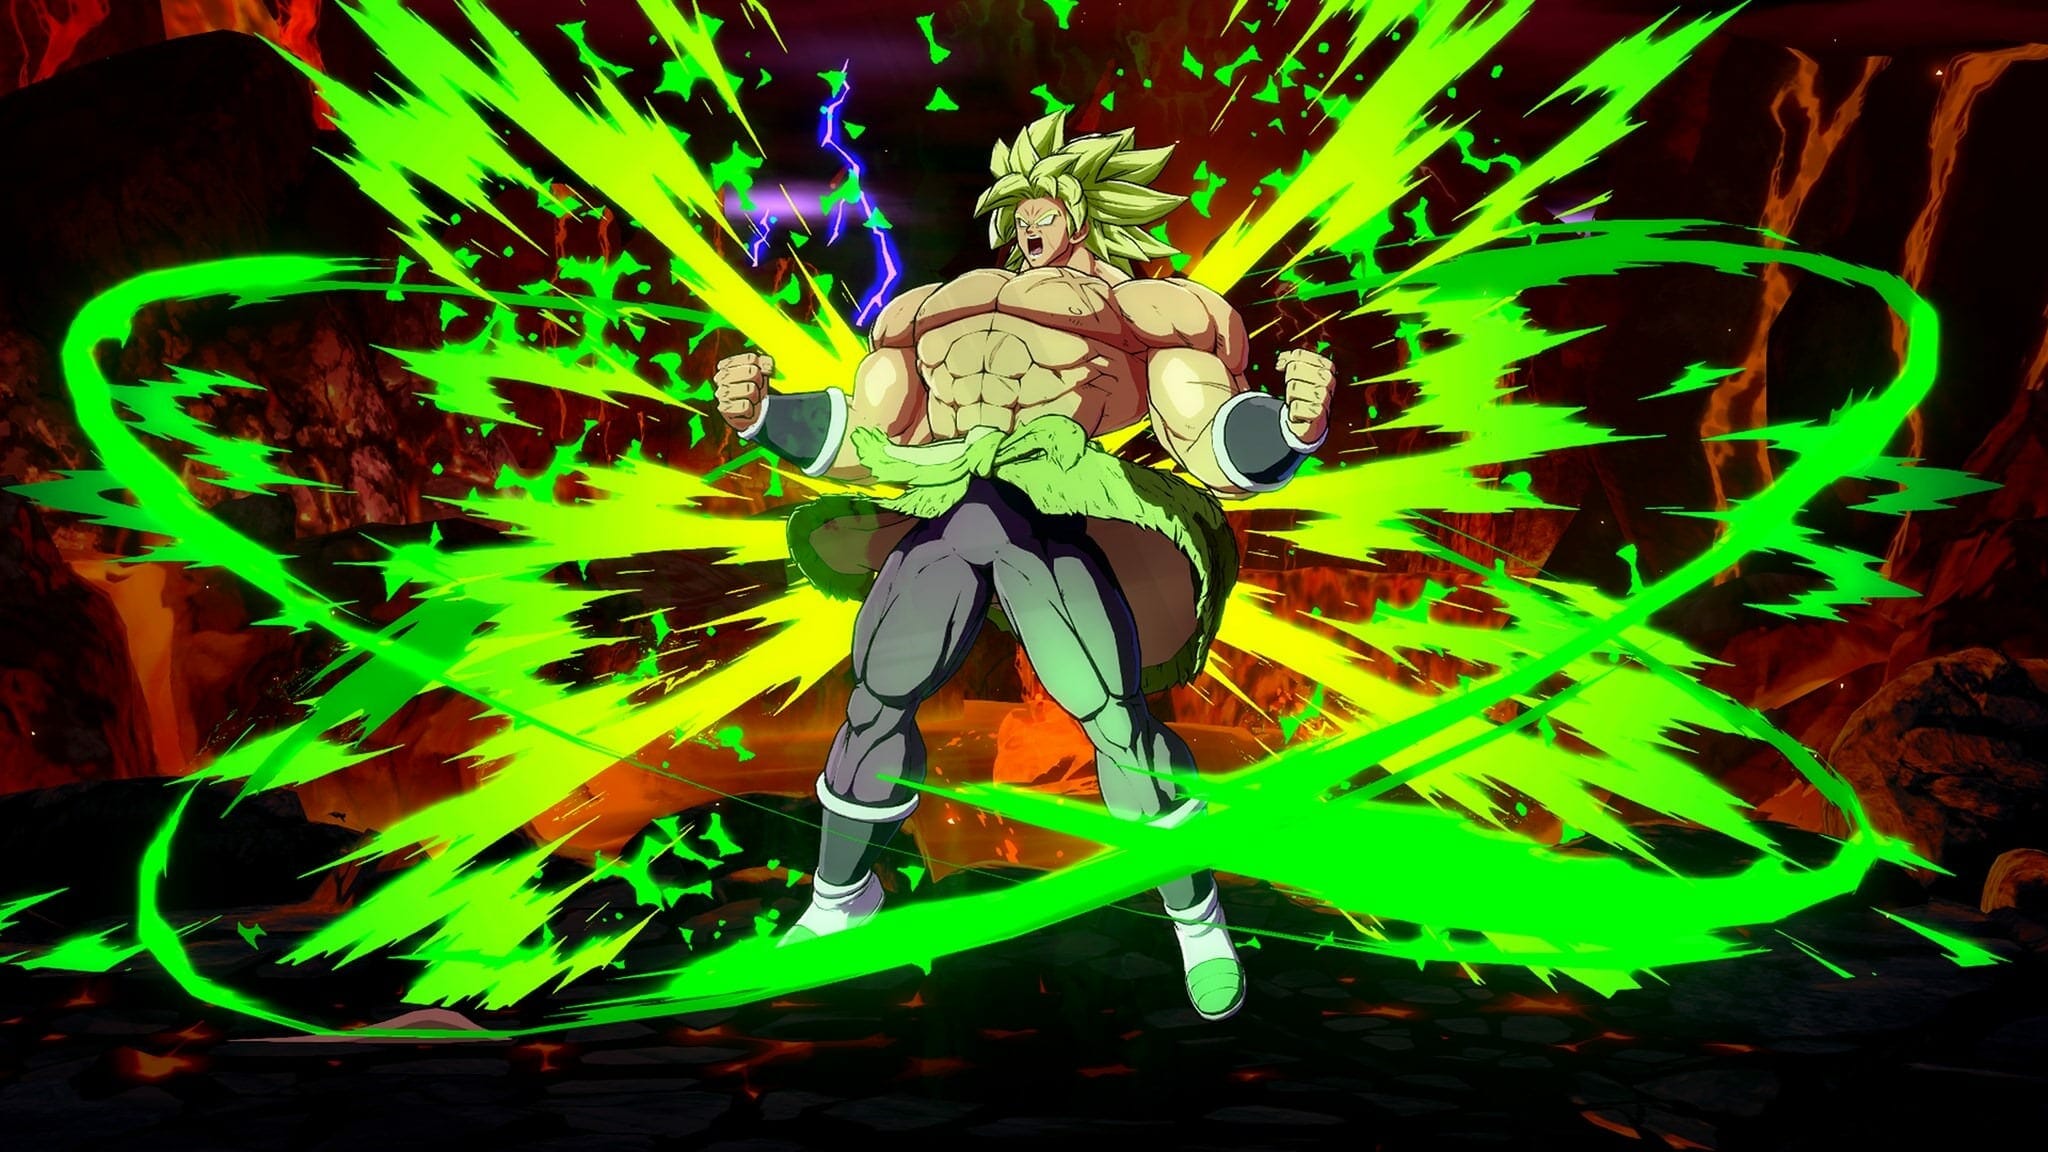 Broly joins DRAGON BALL FighterZ!